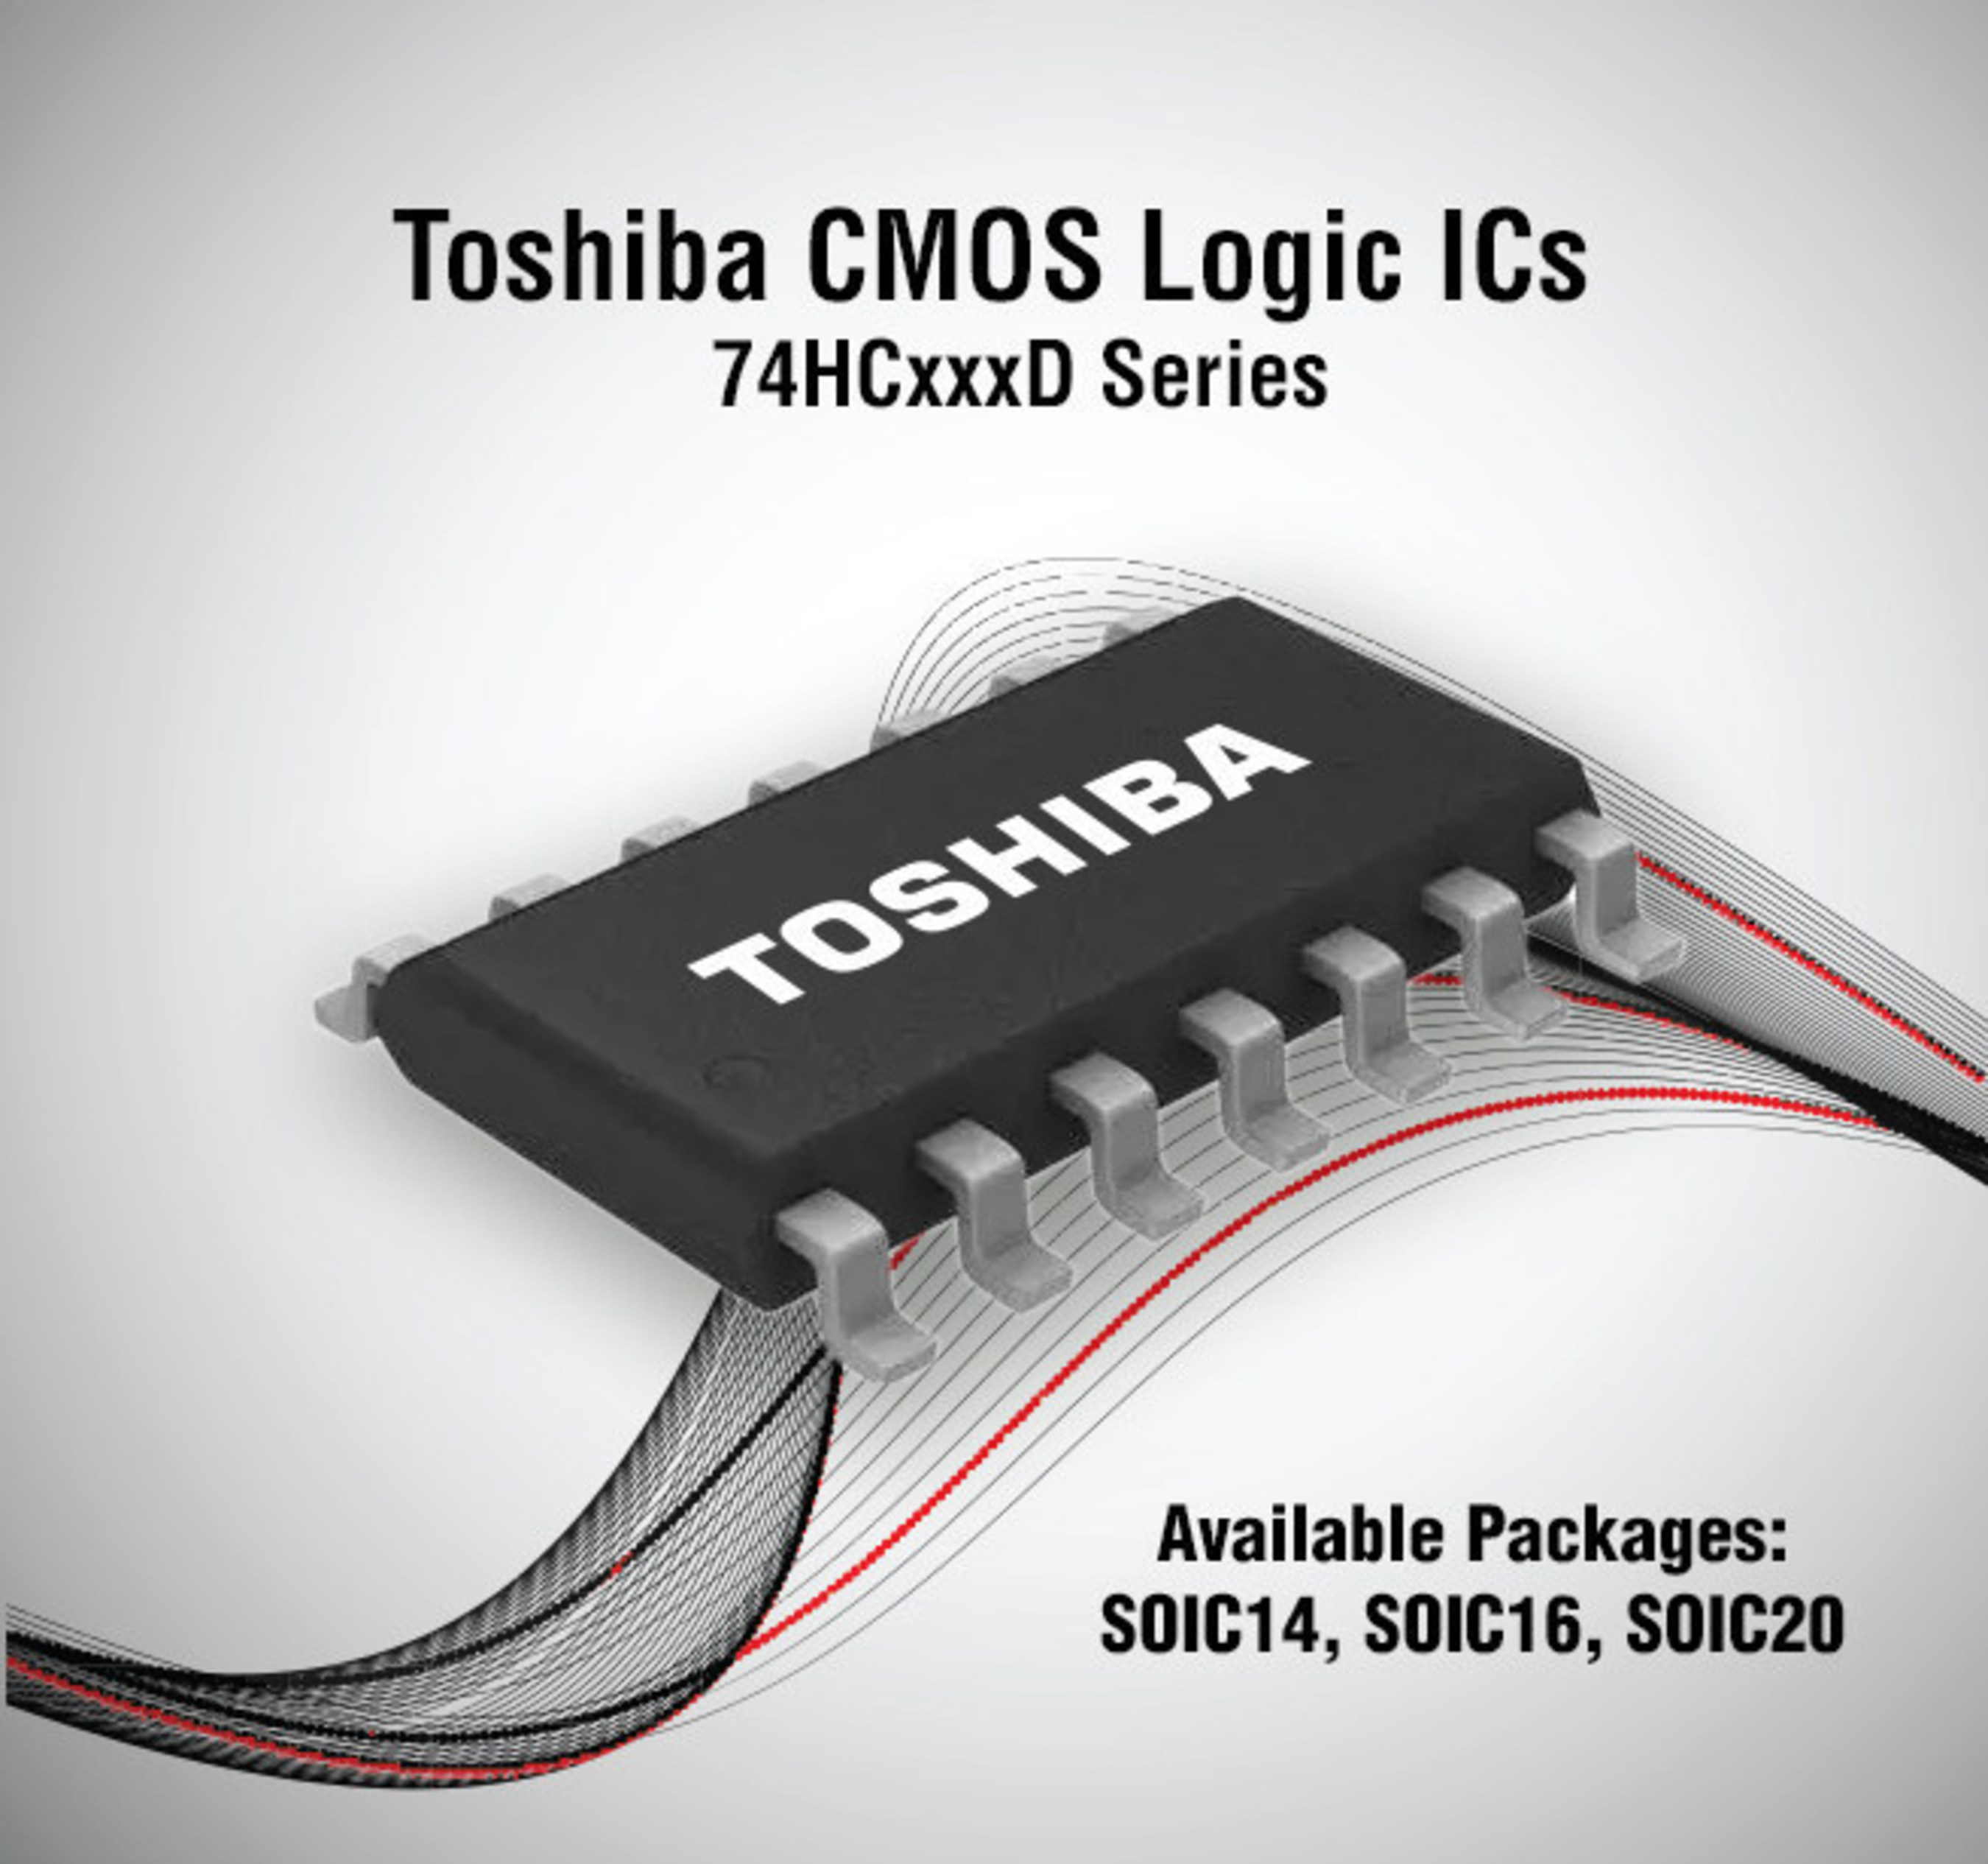 Toshiba has added SOIC packages to its lineup of CMOS Logic ICs.